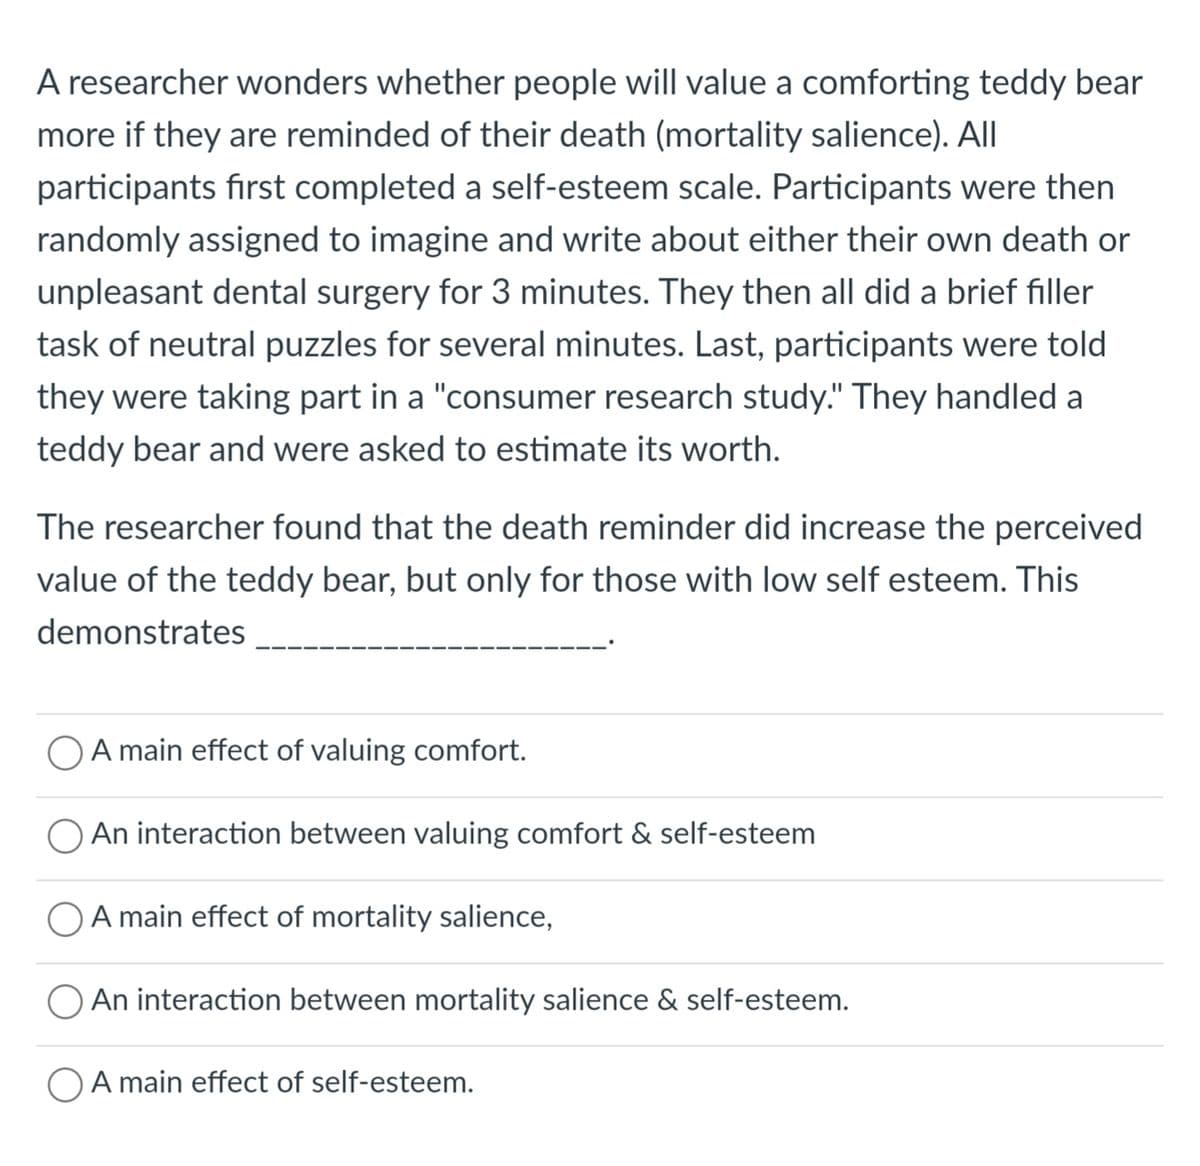 A researcher wonders whether people will value a comforting teddy bear
more if they are reminded of their death (mortality salience). All
participants first completed a self-esteem scale. Participants were then
randomly assigned to imagine and write about either their own death or
unpleasant dental surgery for 3 minutes. They then all did a brief filler
task of neutral puzzles for several minutes. Last, participants were told
they were taking part in a "consumer research study." They handled a
teddy bear and were asked to estimate its worth.
The researcher found that the death reminder did increase the perceived
value of the teddy bear, but only for those with low self esteem. This
demonstrates
O A main effect of valuing comfort.
An interaction between valuing comfort & self-esteem
A main effect of mortality salience,
An interaction between mortality salience & self-esteem.
A main effect of self-esteem.